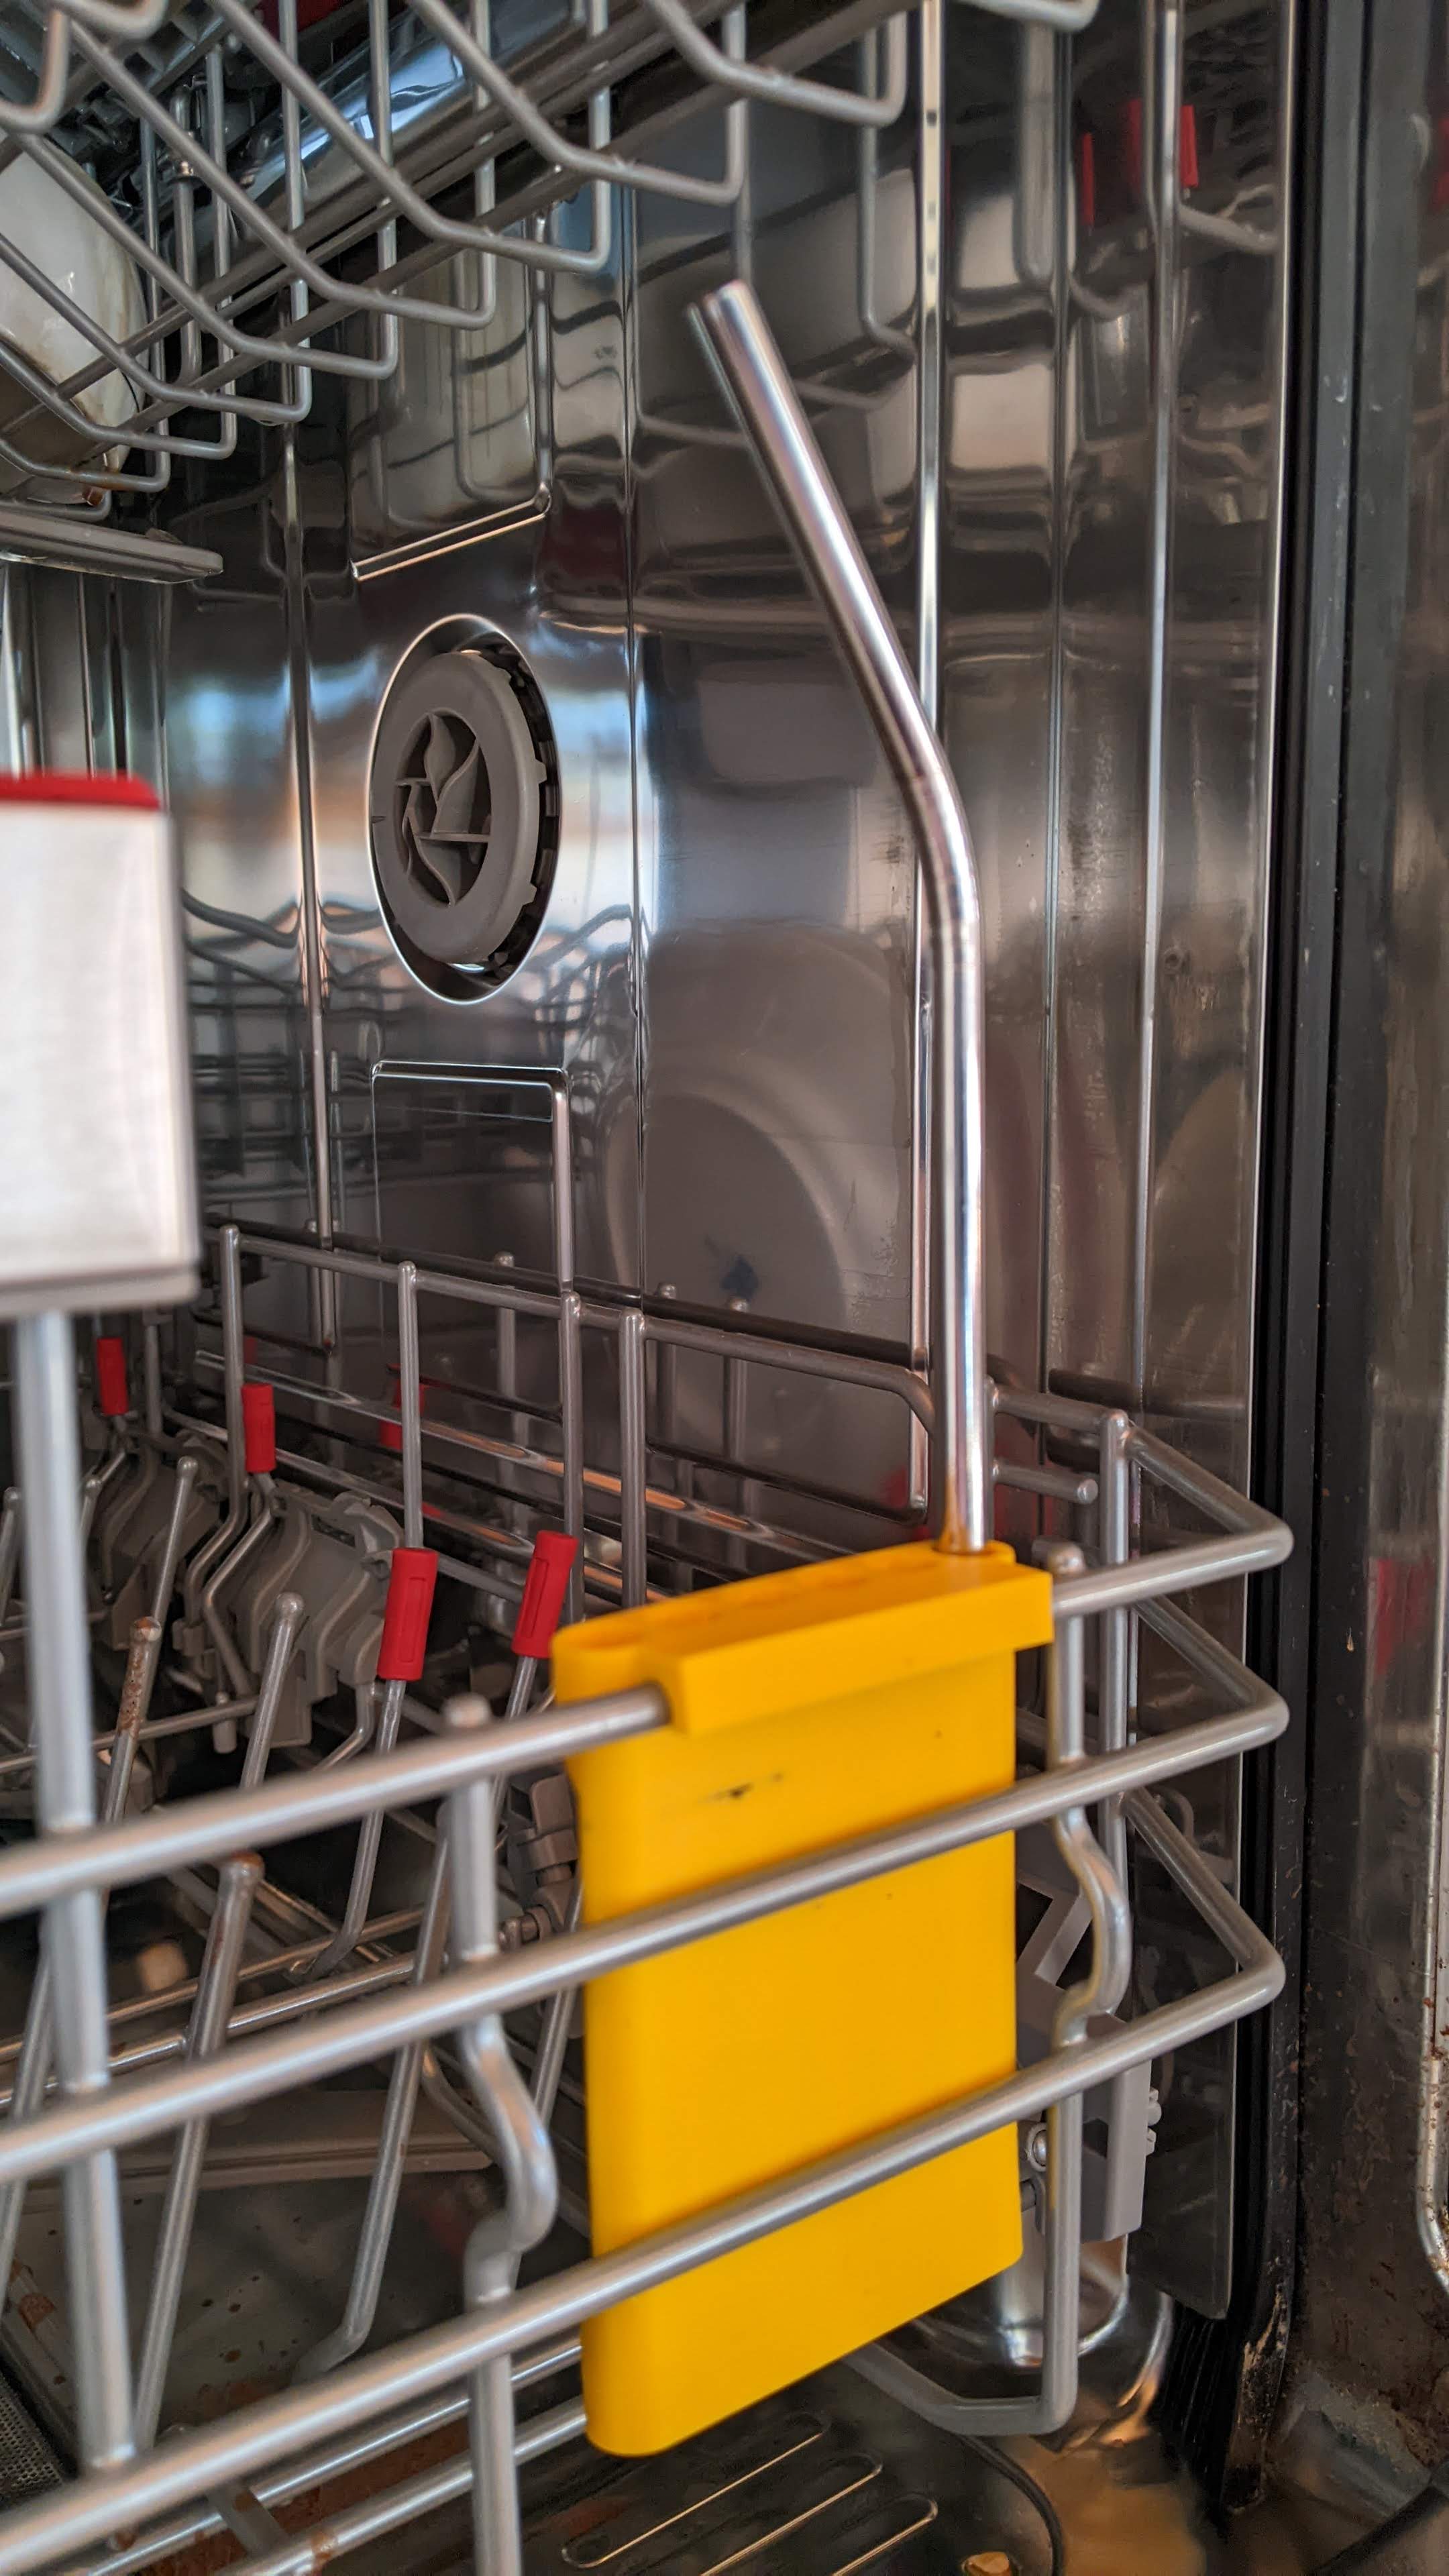 Straw Holder for Dish Washer